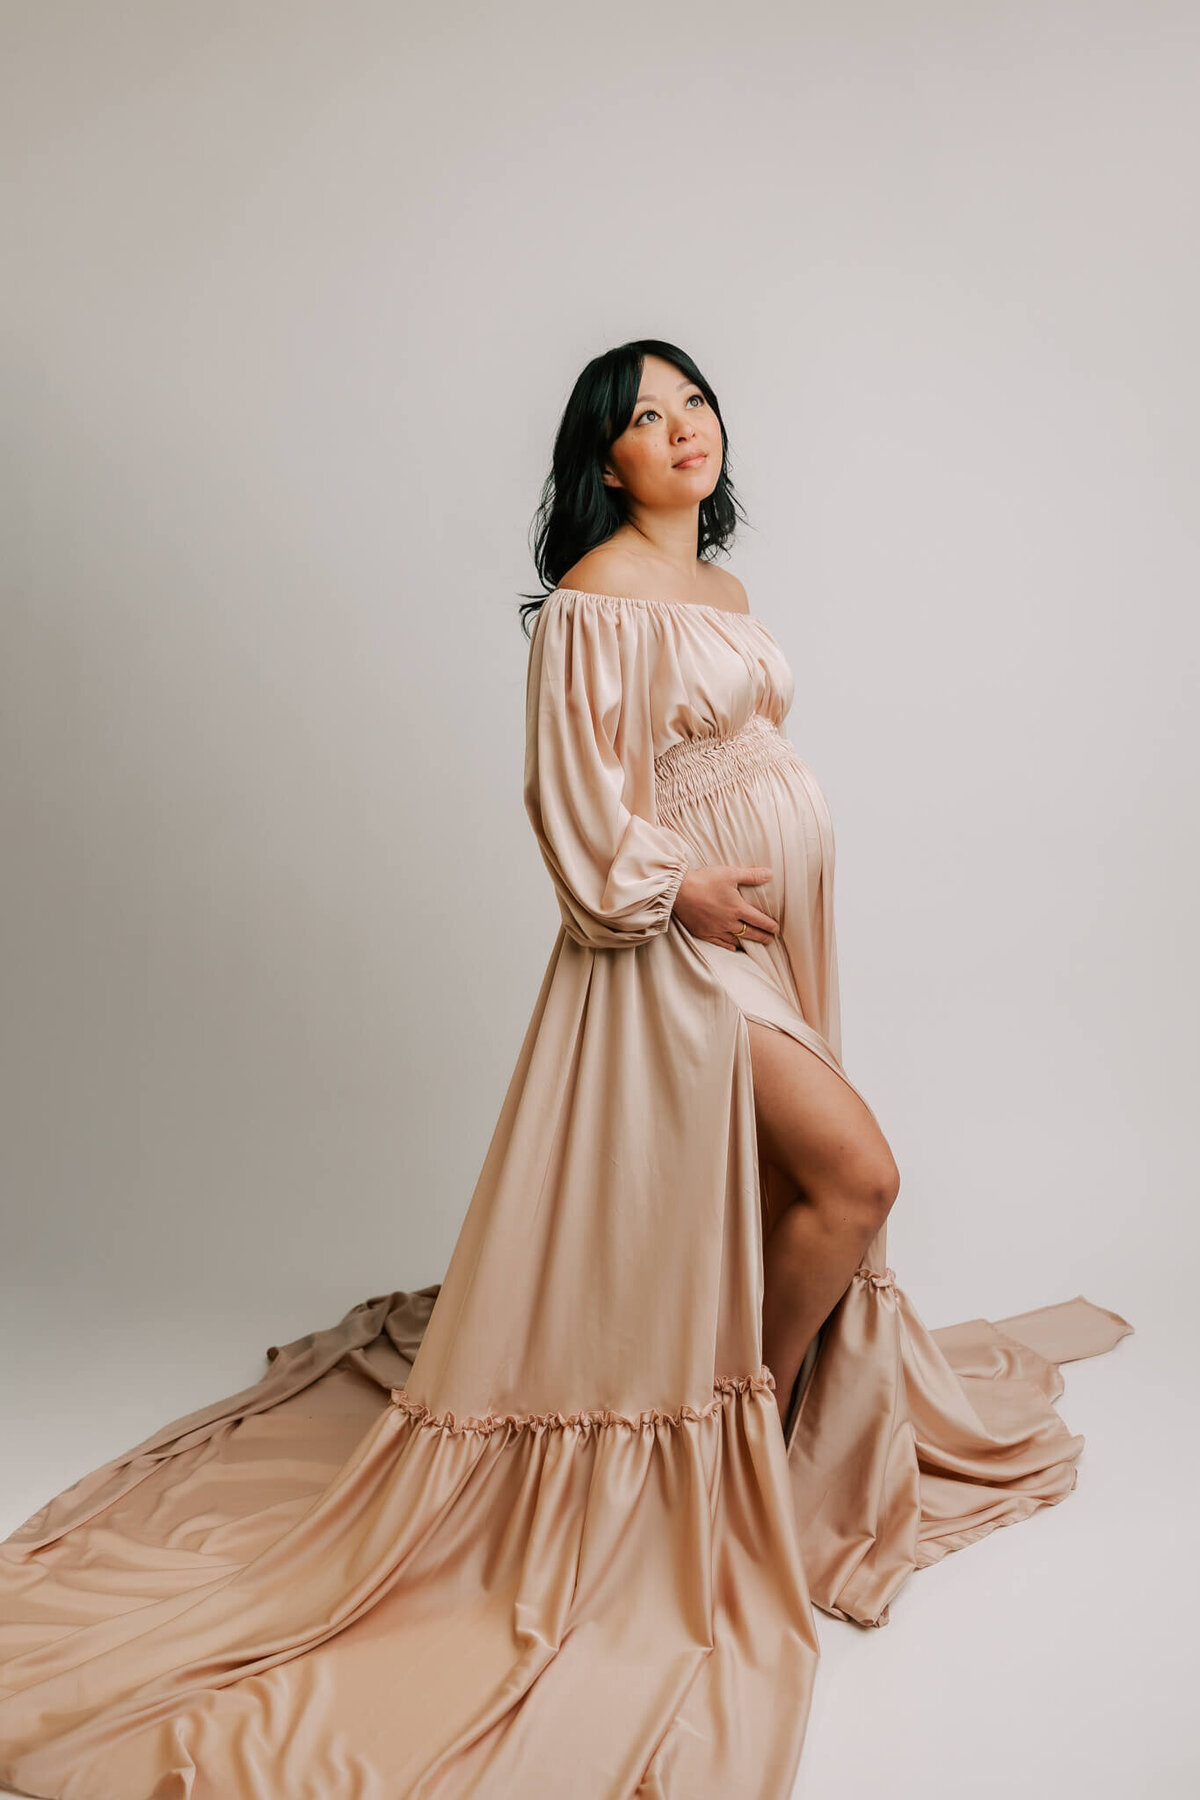 mom holding belly in nude blush satin dress in portland studio maternity session